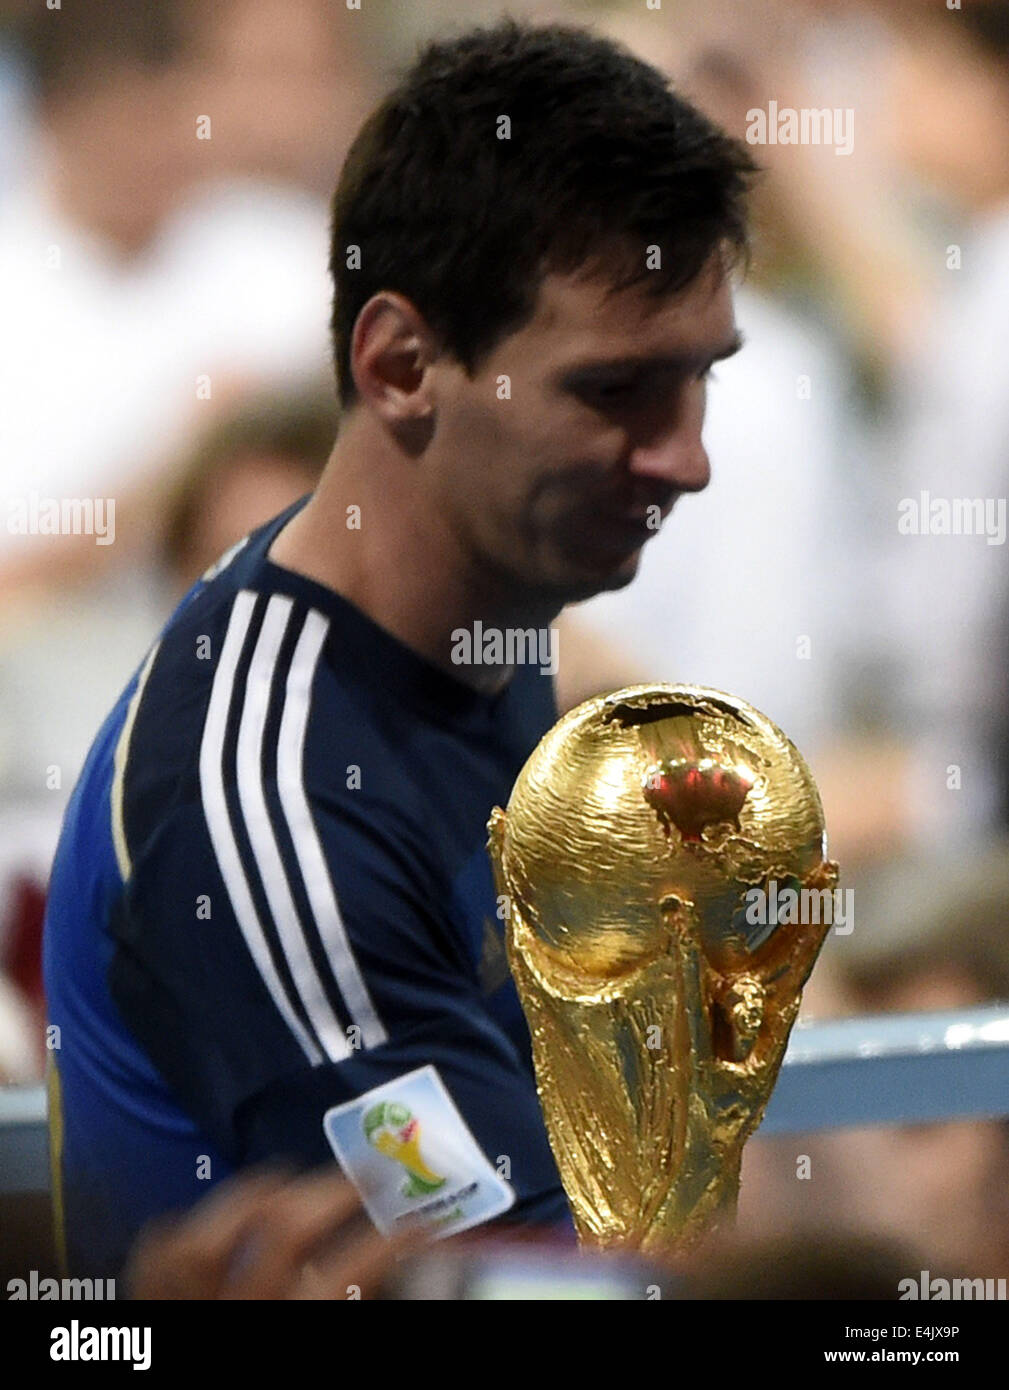 Rio De Janeiro, Brazil. 13th July, 2014. Argentina's Lionel Messi walks by  the World Cup trophy after the final match between Germany and Argentina of  2014 FIFA World Cup at the Estadio